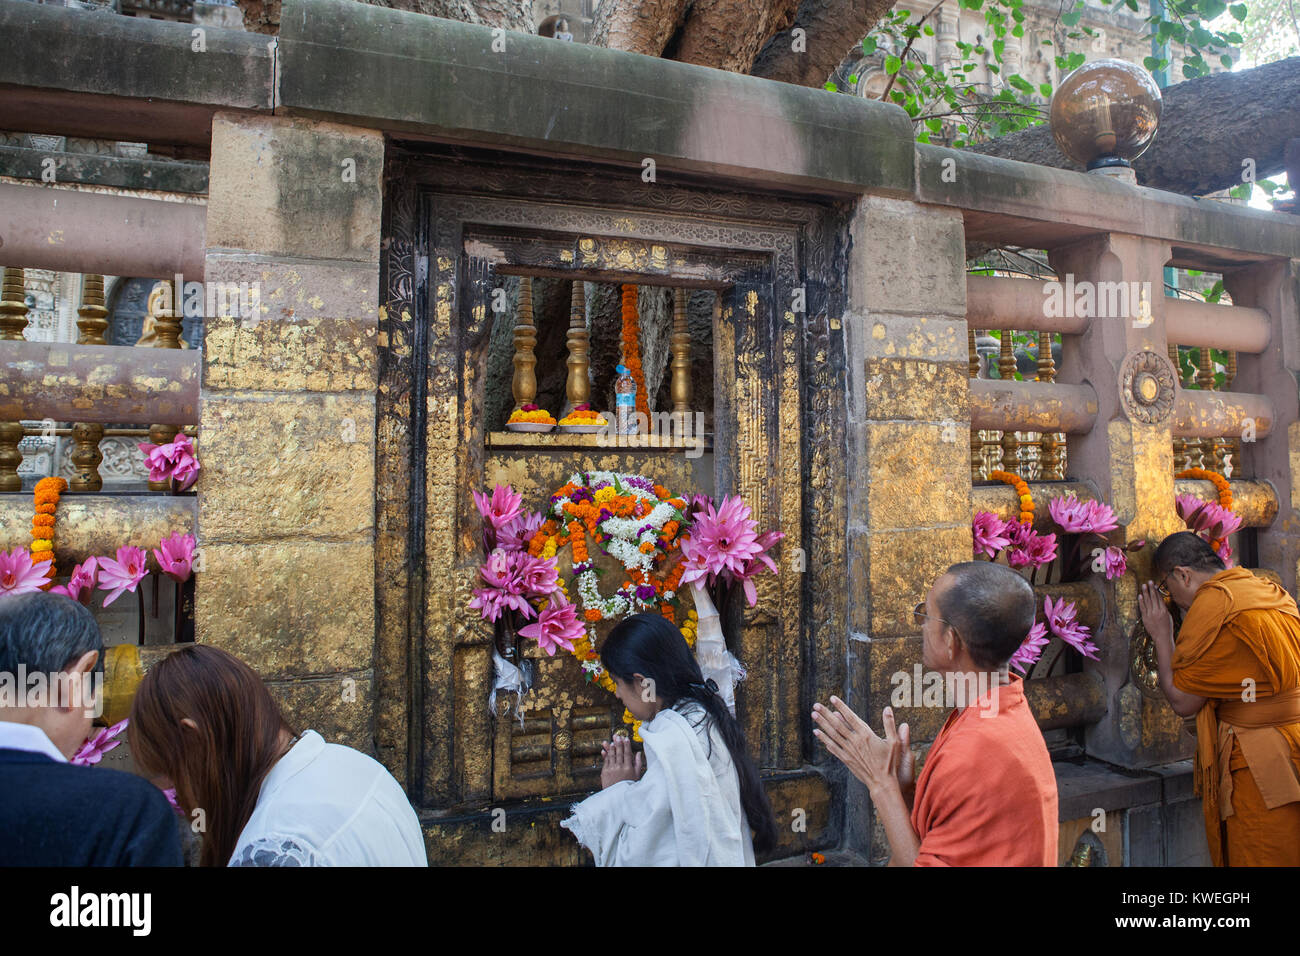 Pilgrims pray at the shrine next to the Bodhi tree (where the Buddha is said to have gained enlightenment) at the Mahabodhi Temple in Bodhgaya, India Stock Photo